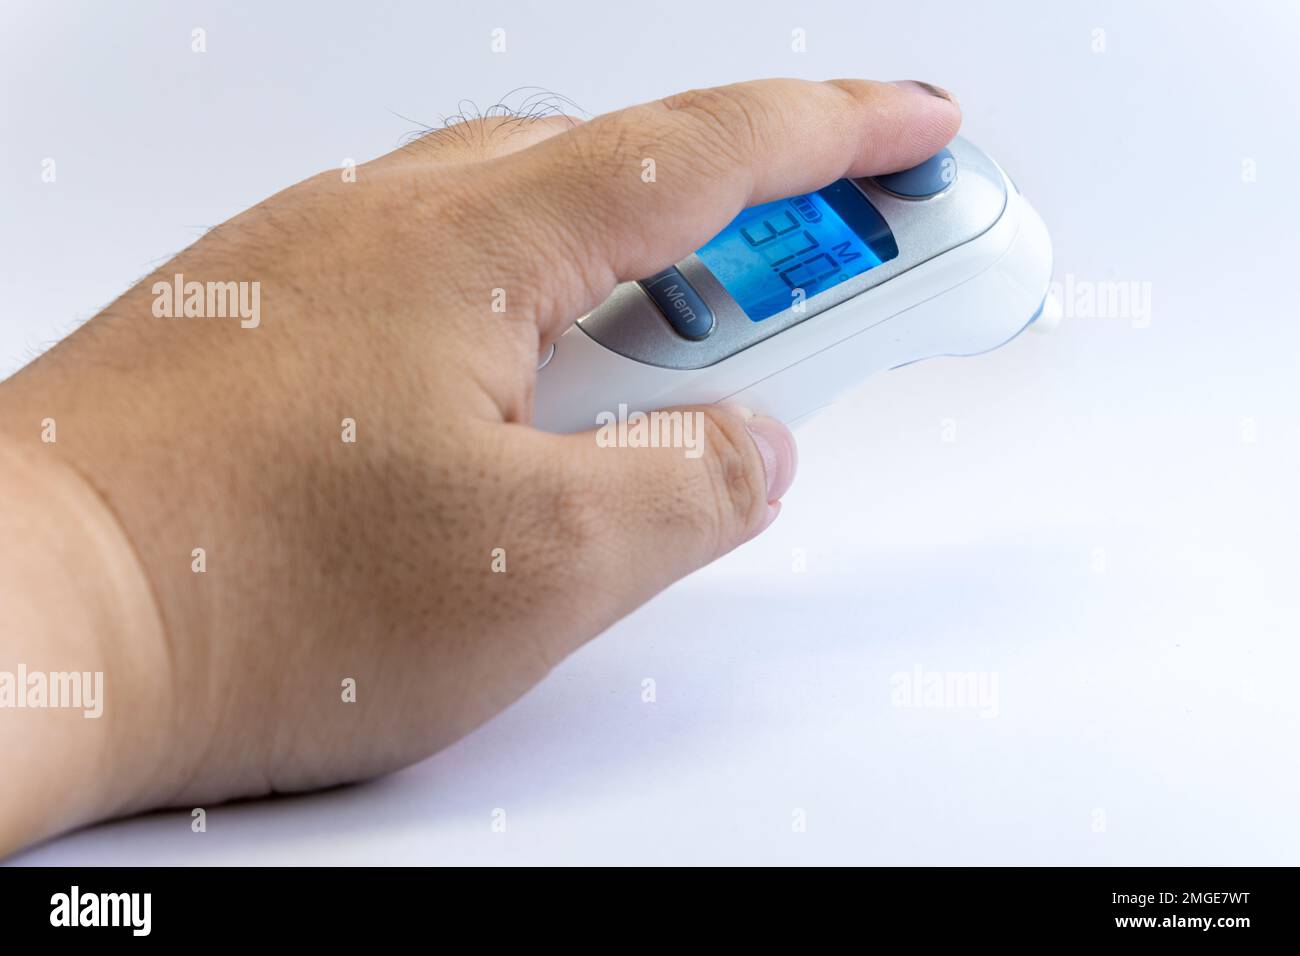 https://c8.alamy.com/comp/2MGE7WT/human-hand-hold-a-digital-infrared-thermometer-for-body-temperature-scan-from-coronavirus-disease-covid-19-flu-fever-or-other-sickness-health-care-2MGE7WT.jpg